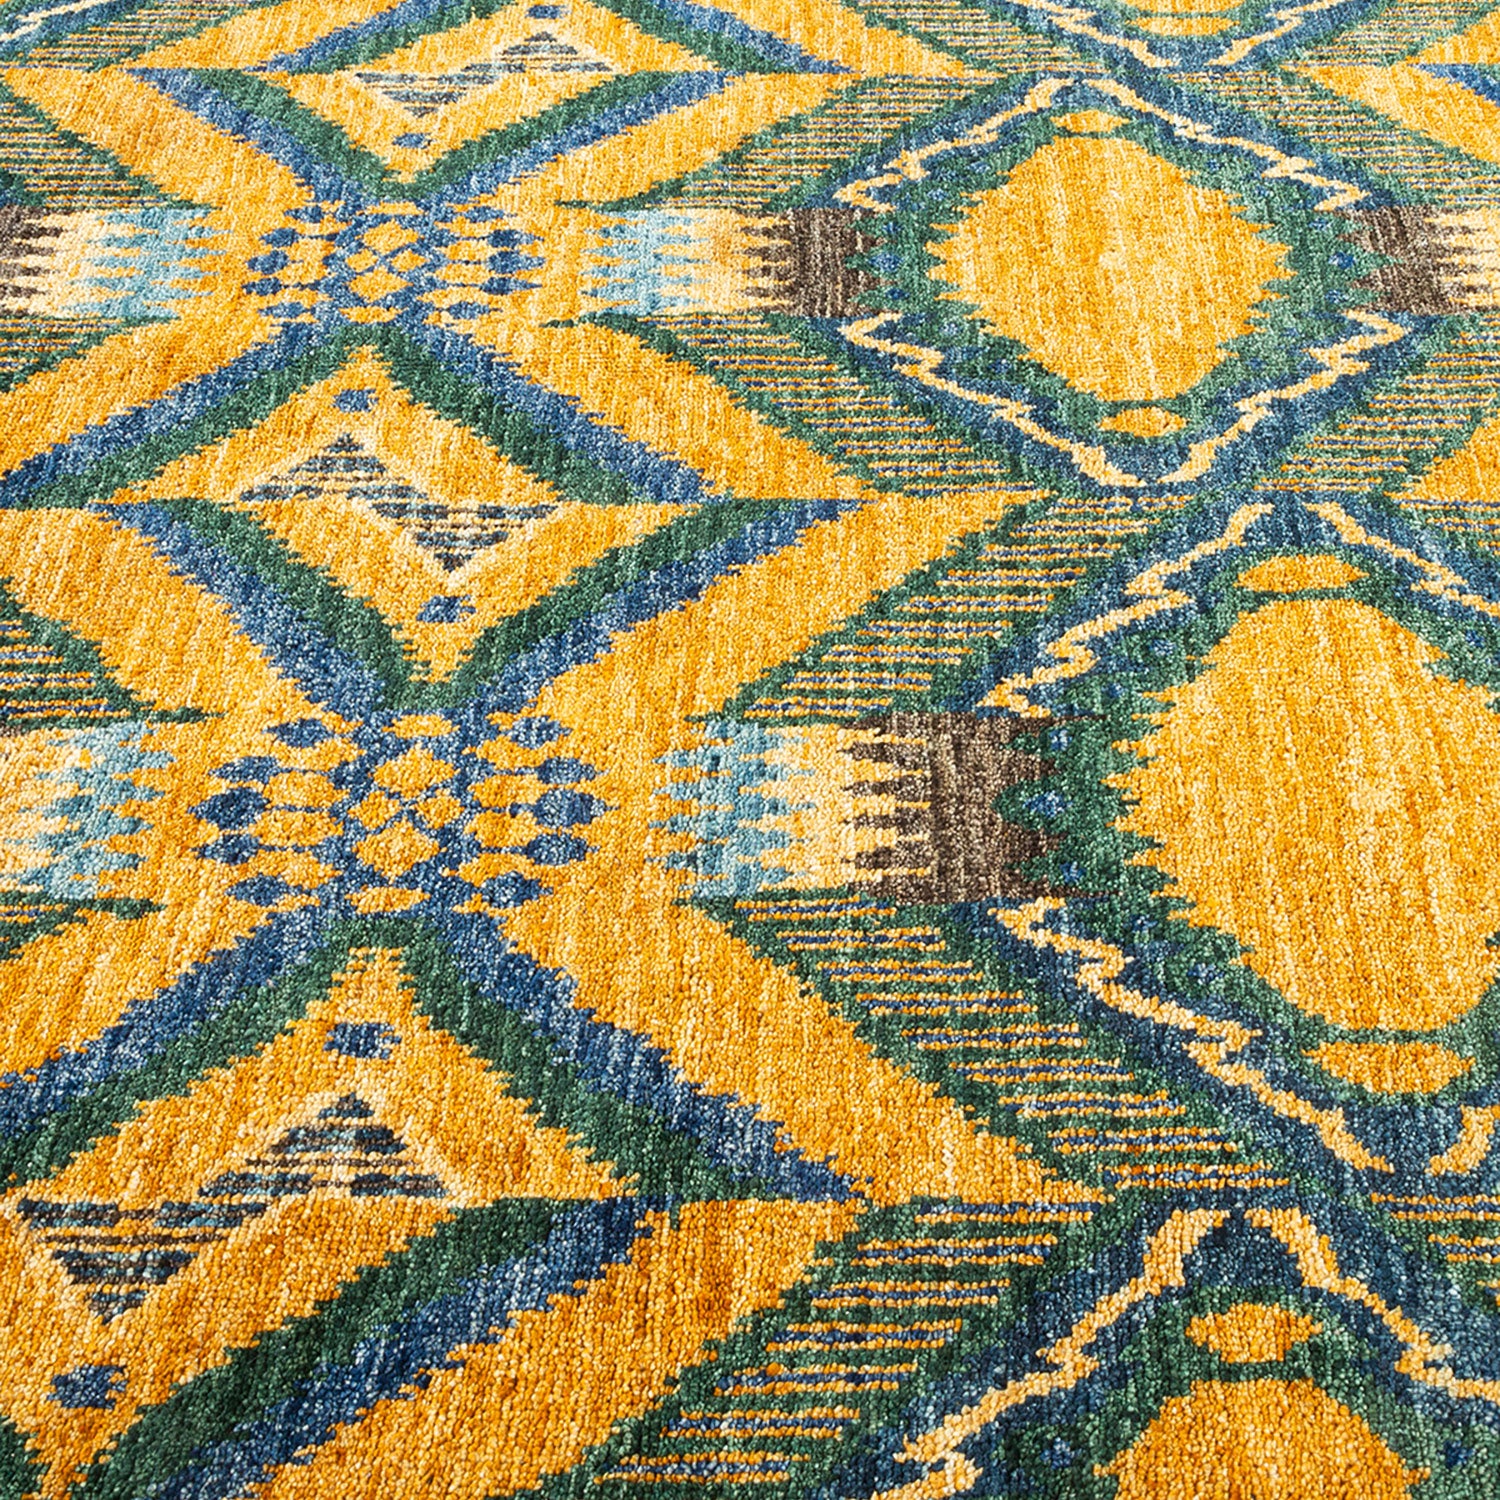 Vibrant carpet with geometric pattern in yellow, orange, green, and blue.